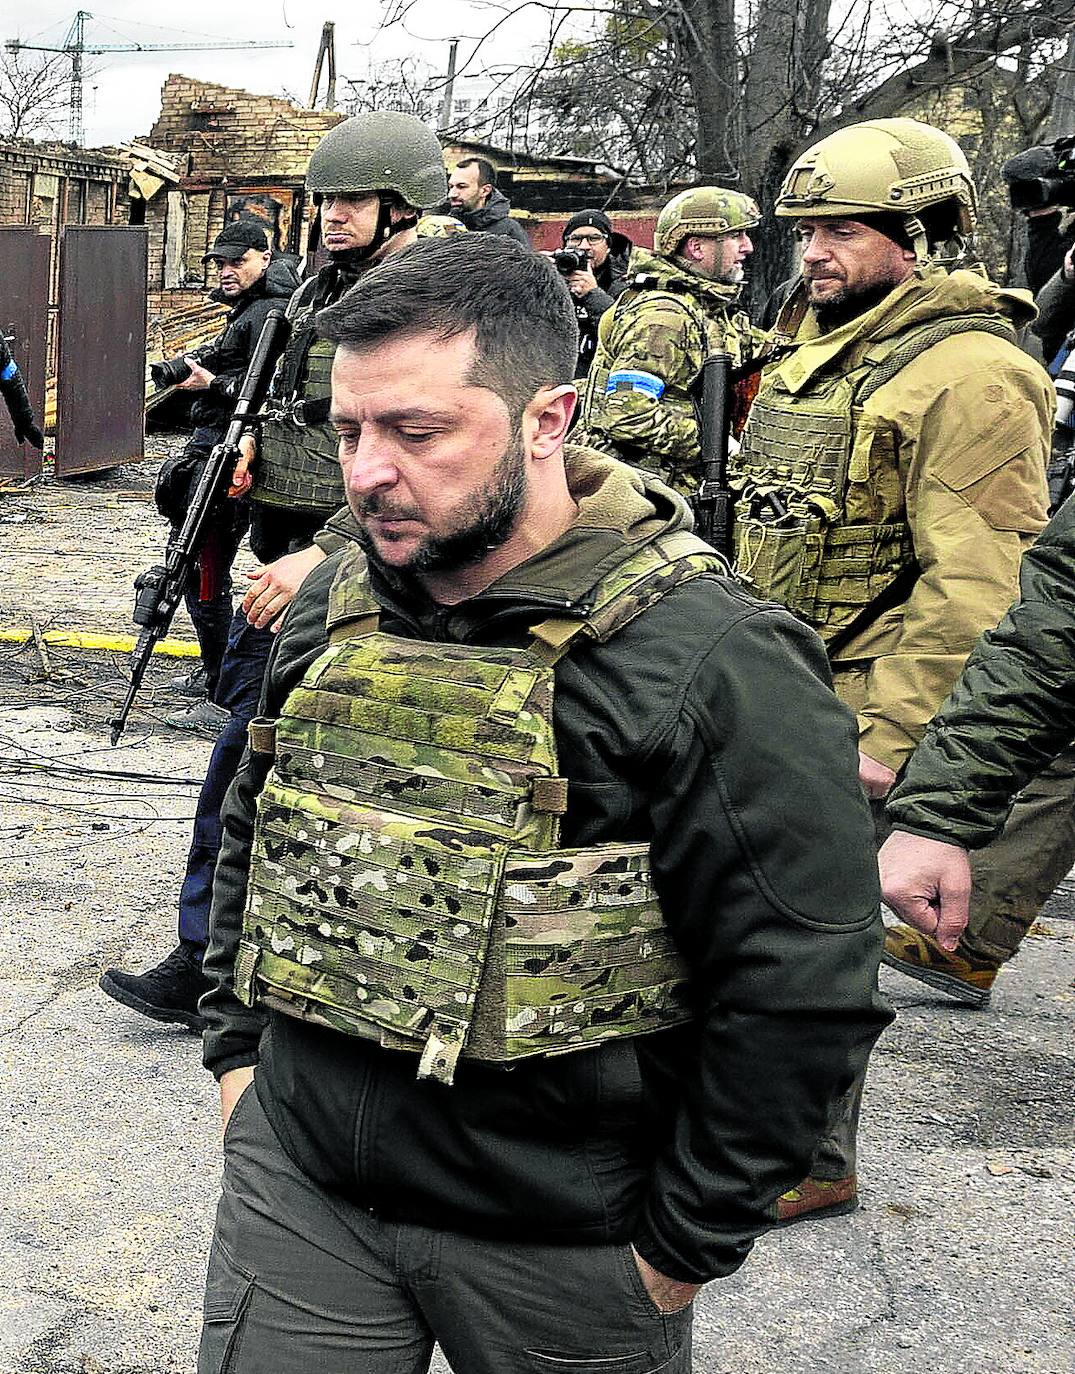 Volodimir Zelensky, surrounded by soldiers, during his visit to Bucha in early April.